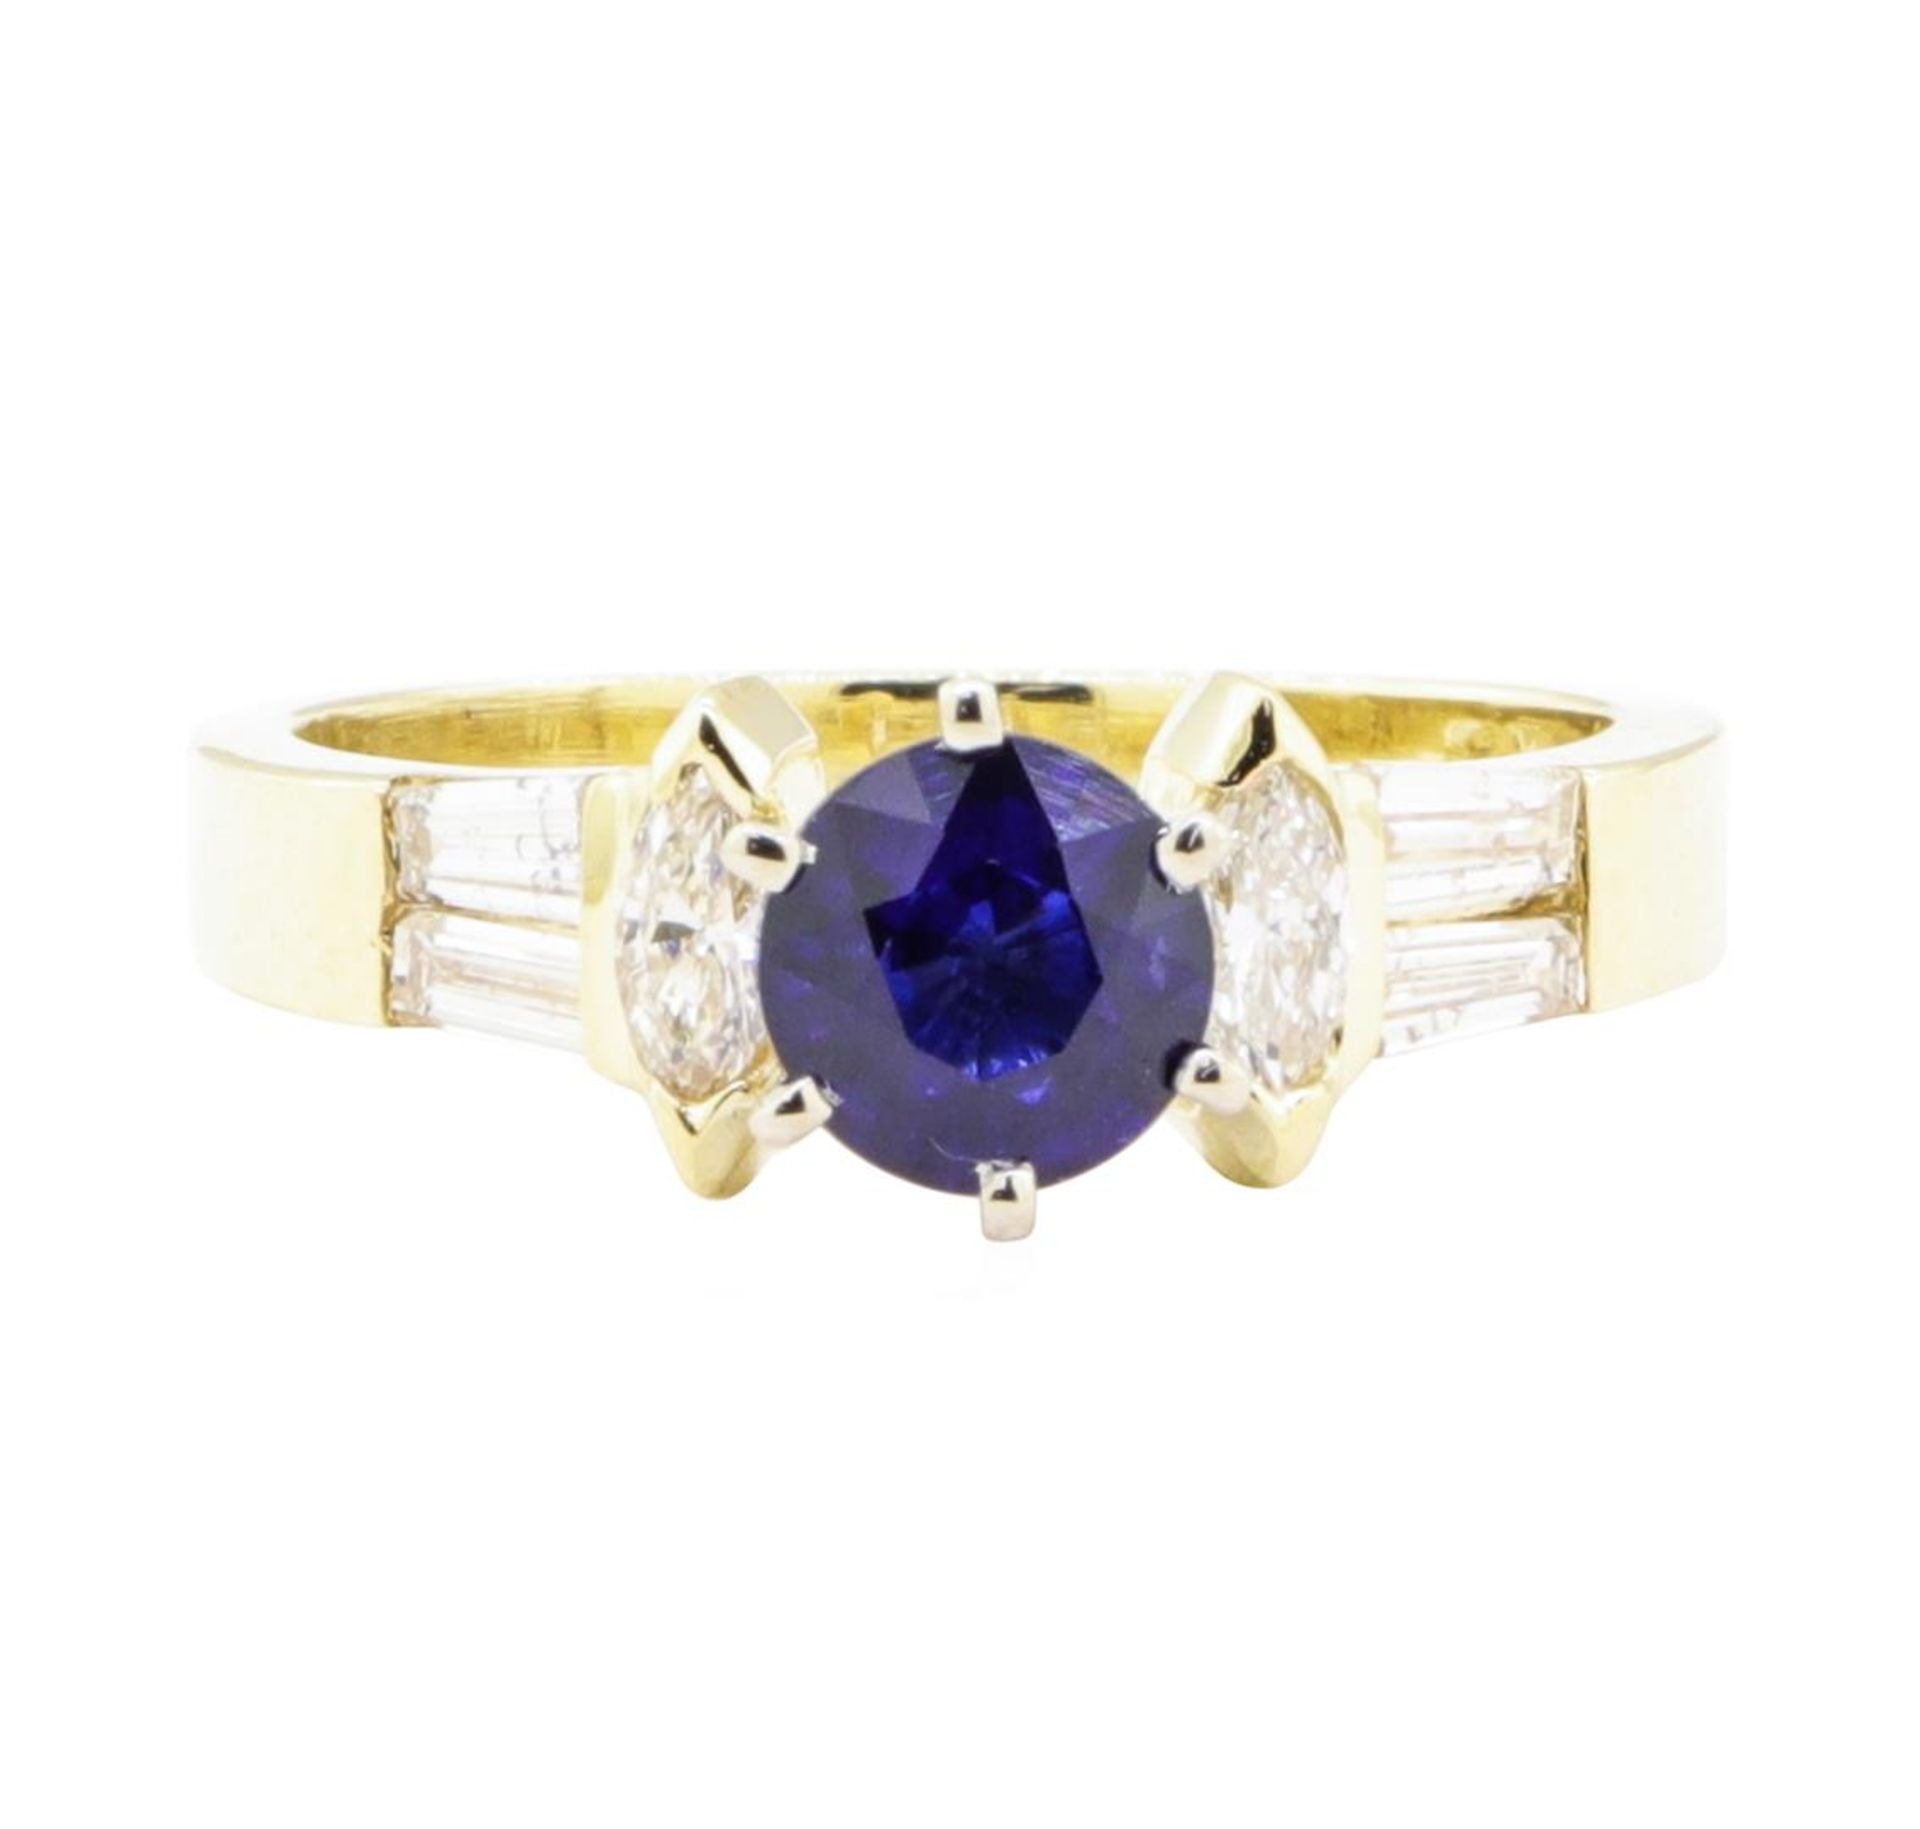 1.39ctw Sapphire and Diamond Ring - 14KT Yellow Gold - Image 2 of 4